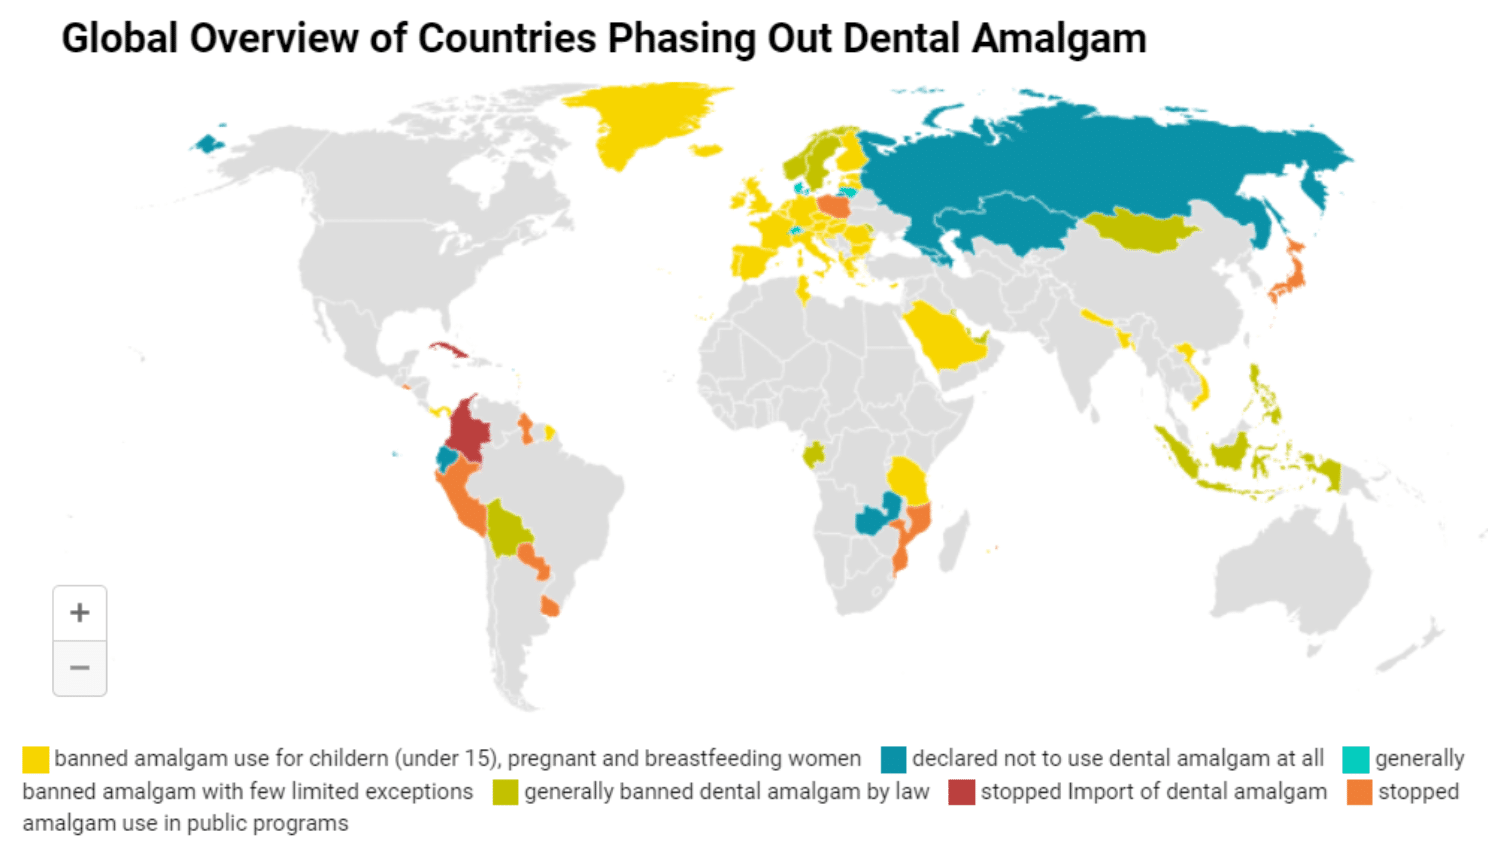 World map showcasing the global overview of countries phasing out dental amalgam, color-coded for clarity. Yellow indicates countries that have banned amalgam use for children (under 15) and pregnant/breastfeeding women. Dark Blue represents nations declaring not to use dental amalgam at all. Light Blue signifies countries generally banning amalgam with limited exceptions. Green marks nations that have a legal ban on dental amalgam. Red indicates countries stopping the import of dental amalgam. Orange signifies nations that have halted amalgam use in public programs.